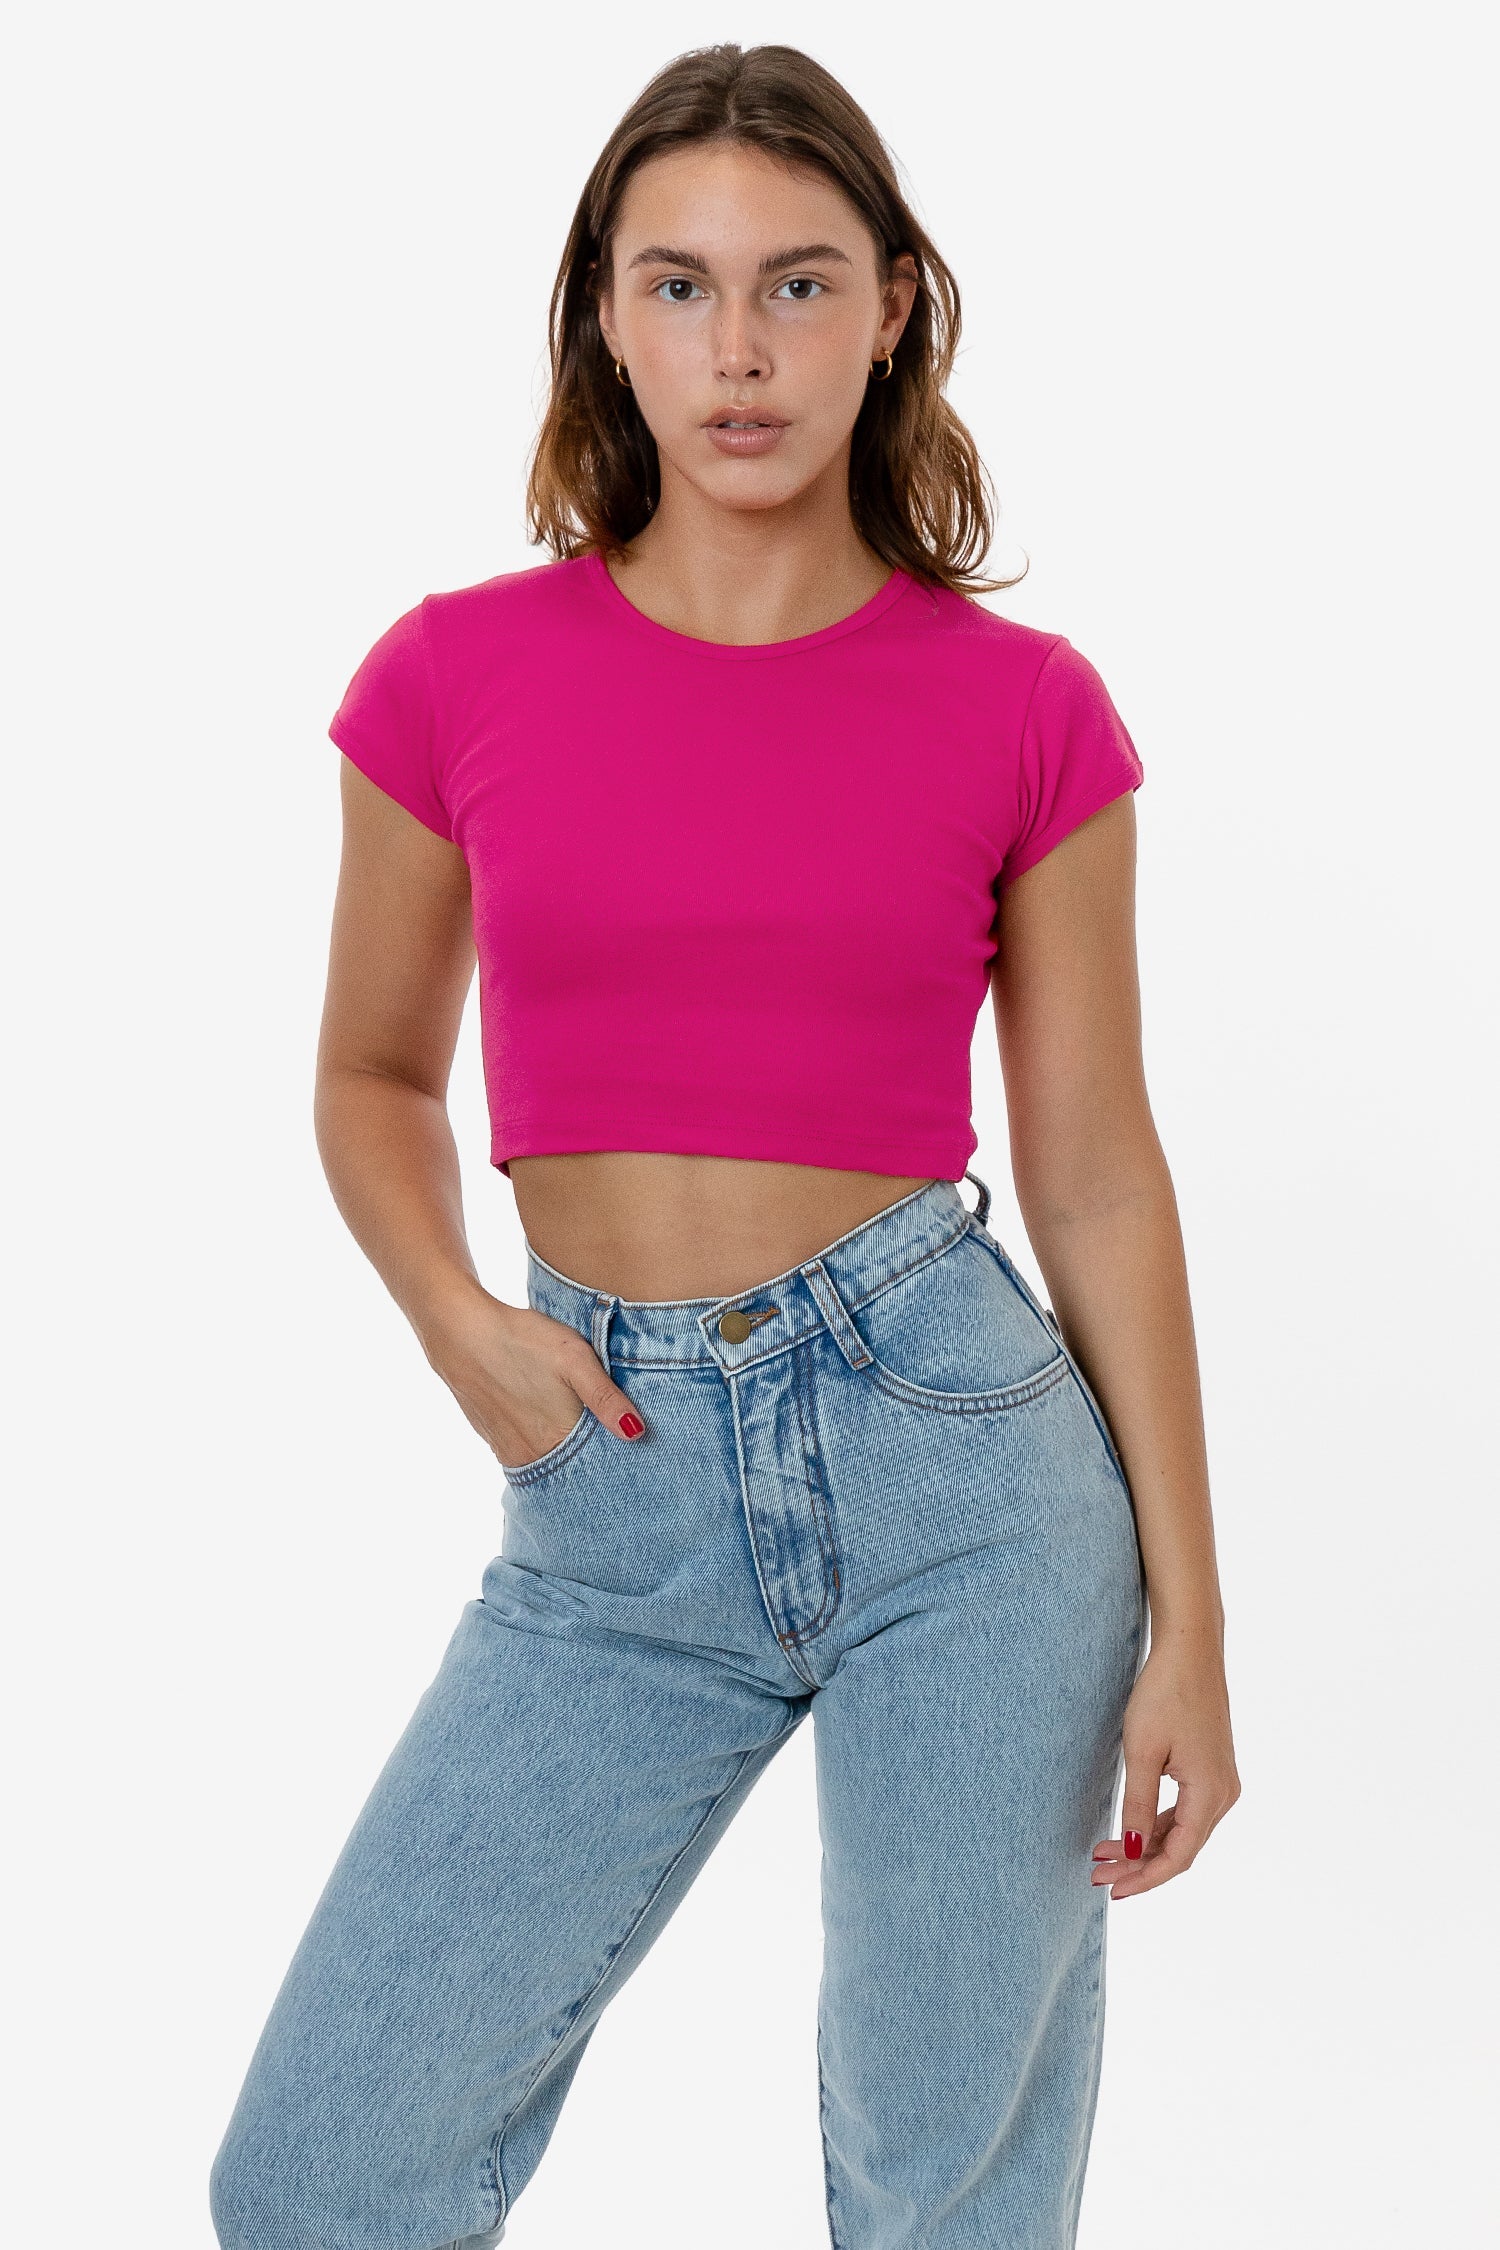 Base Stretch Crop Baby Tee, Red, XL - Women's Tops - PINK - Yahoo